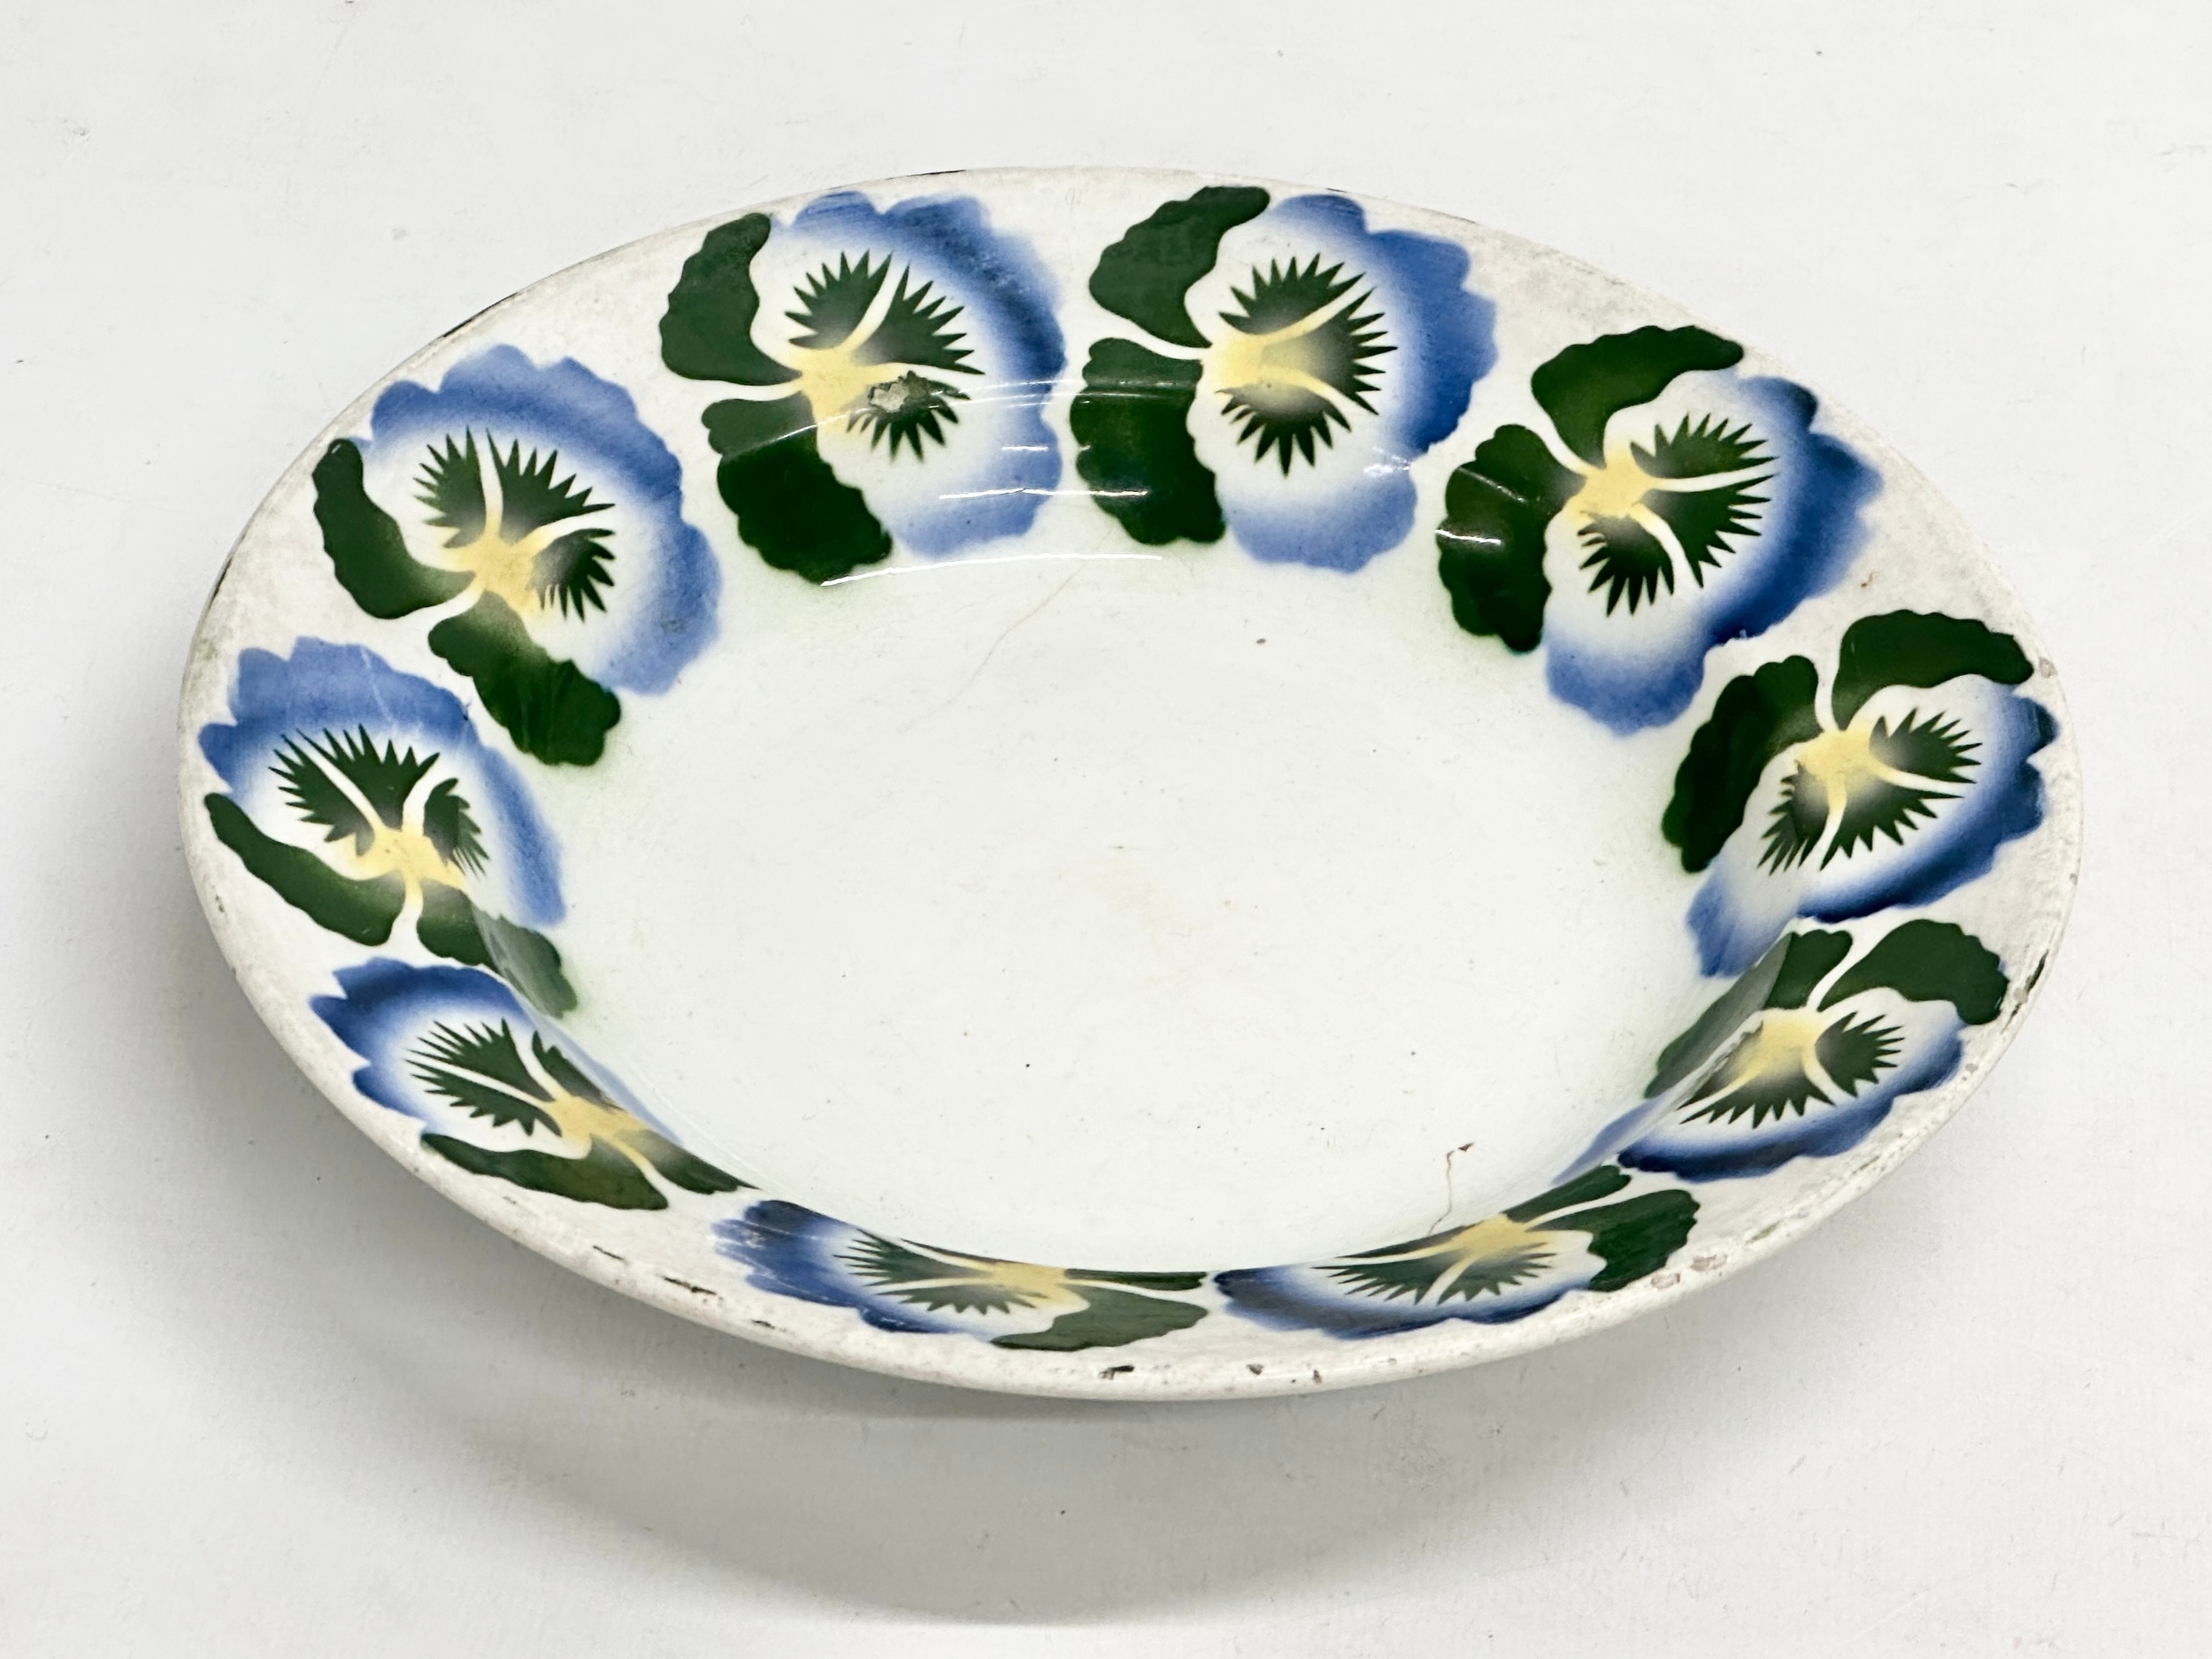 A collection of early/mid 19th century earthenware pottery. Large Italian bowl 30x6.5cm, circa - Image 9 of 15